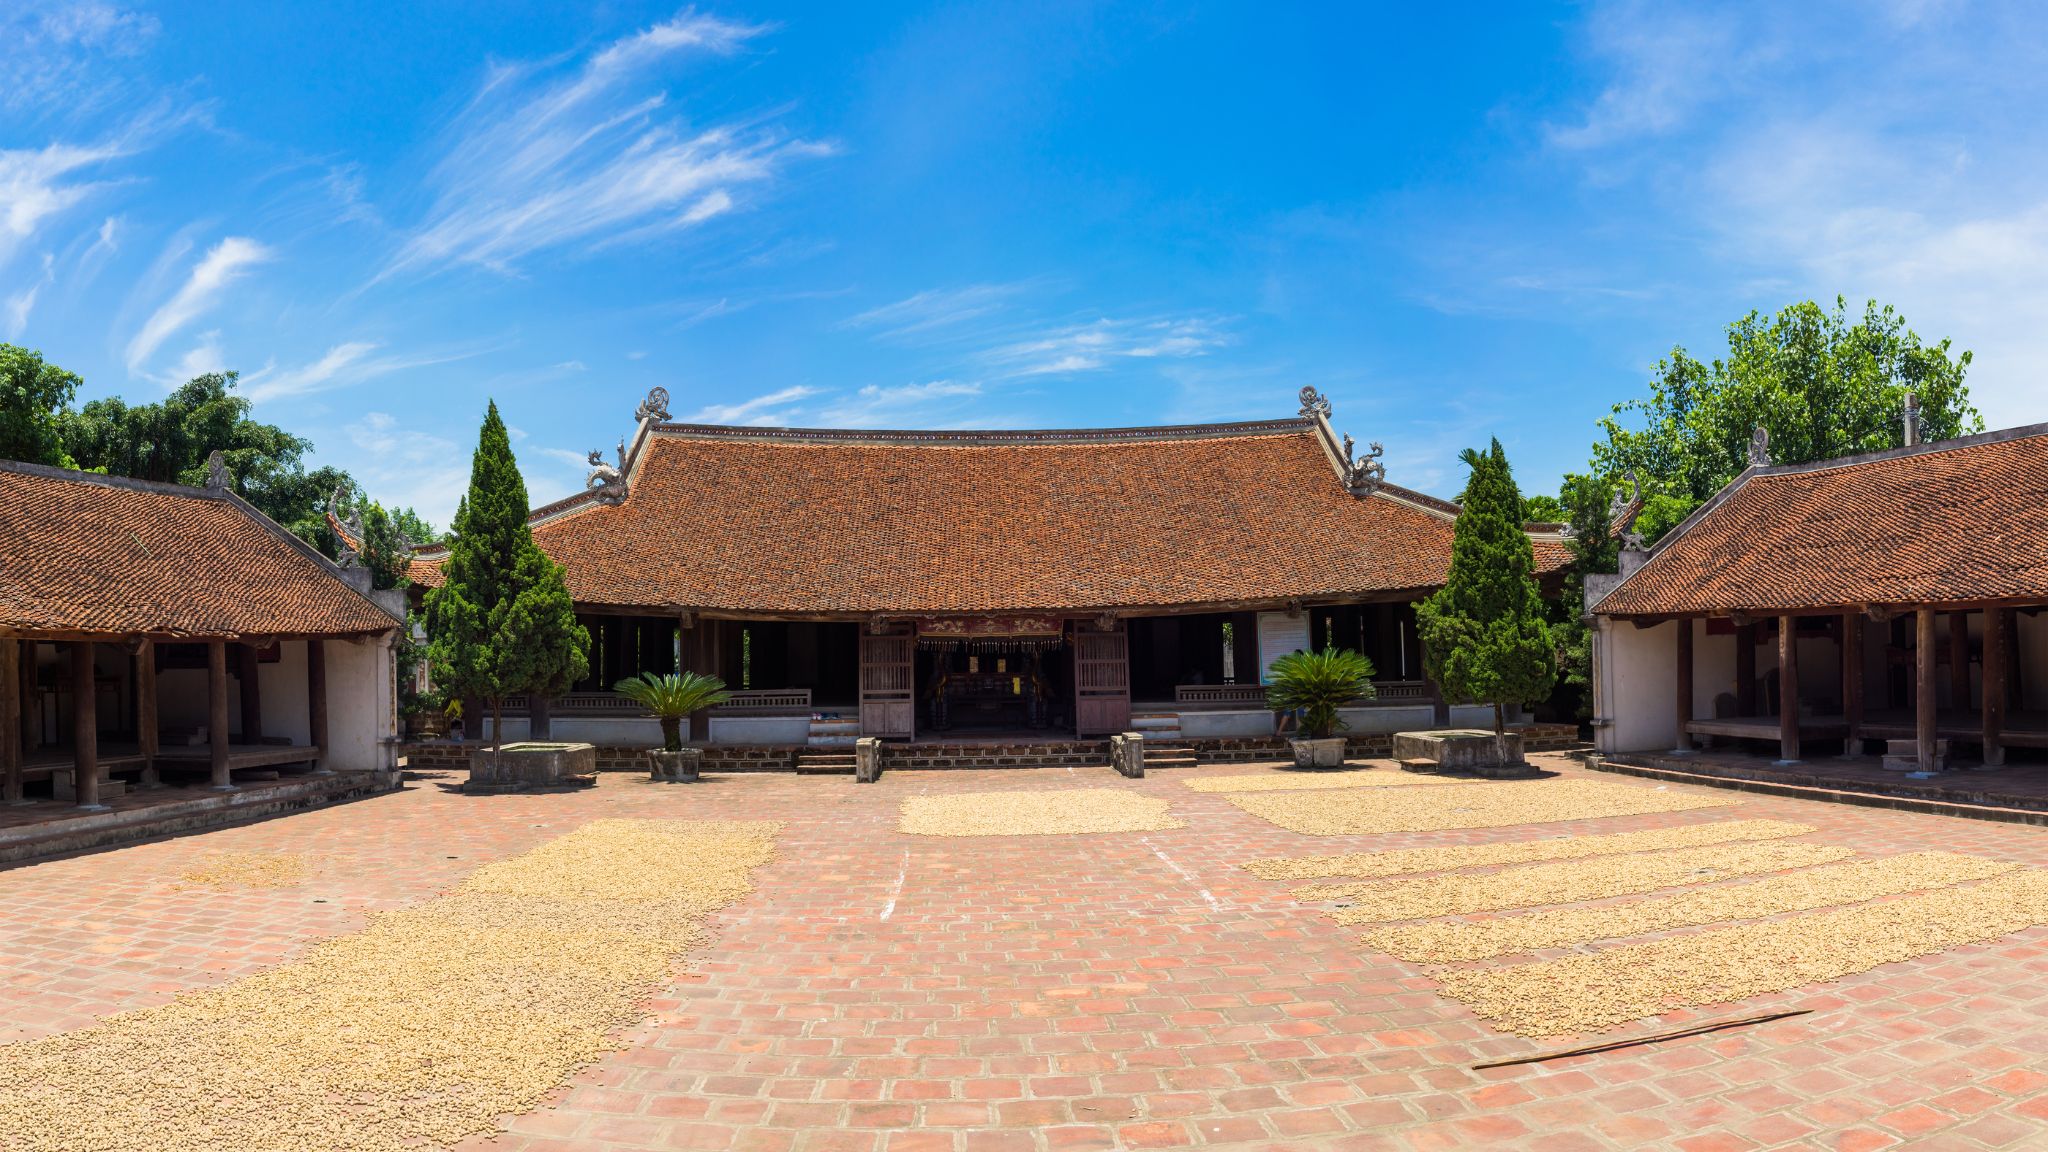 Day 1 Duong Lam Village Honored As A National Cultural Monument